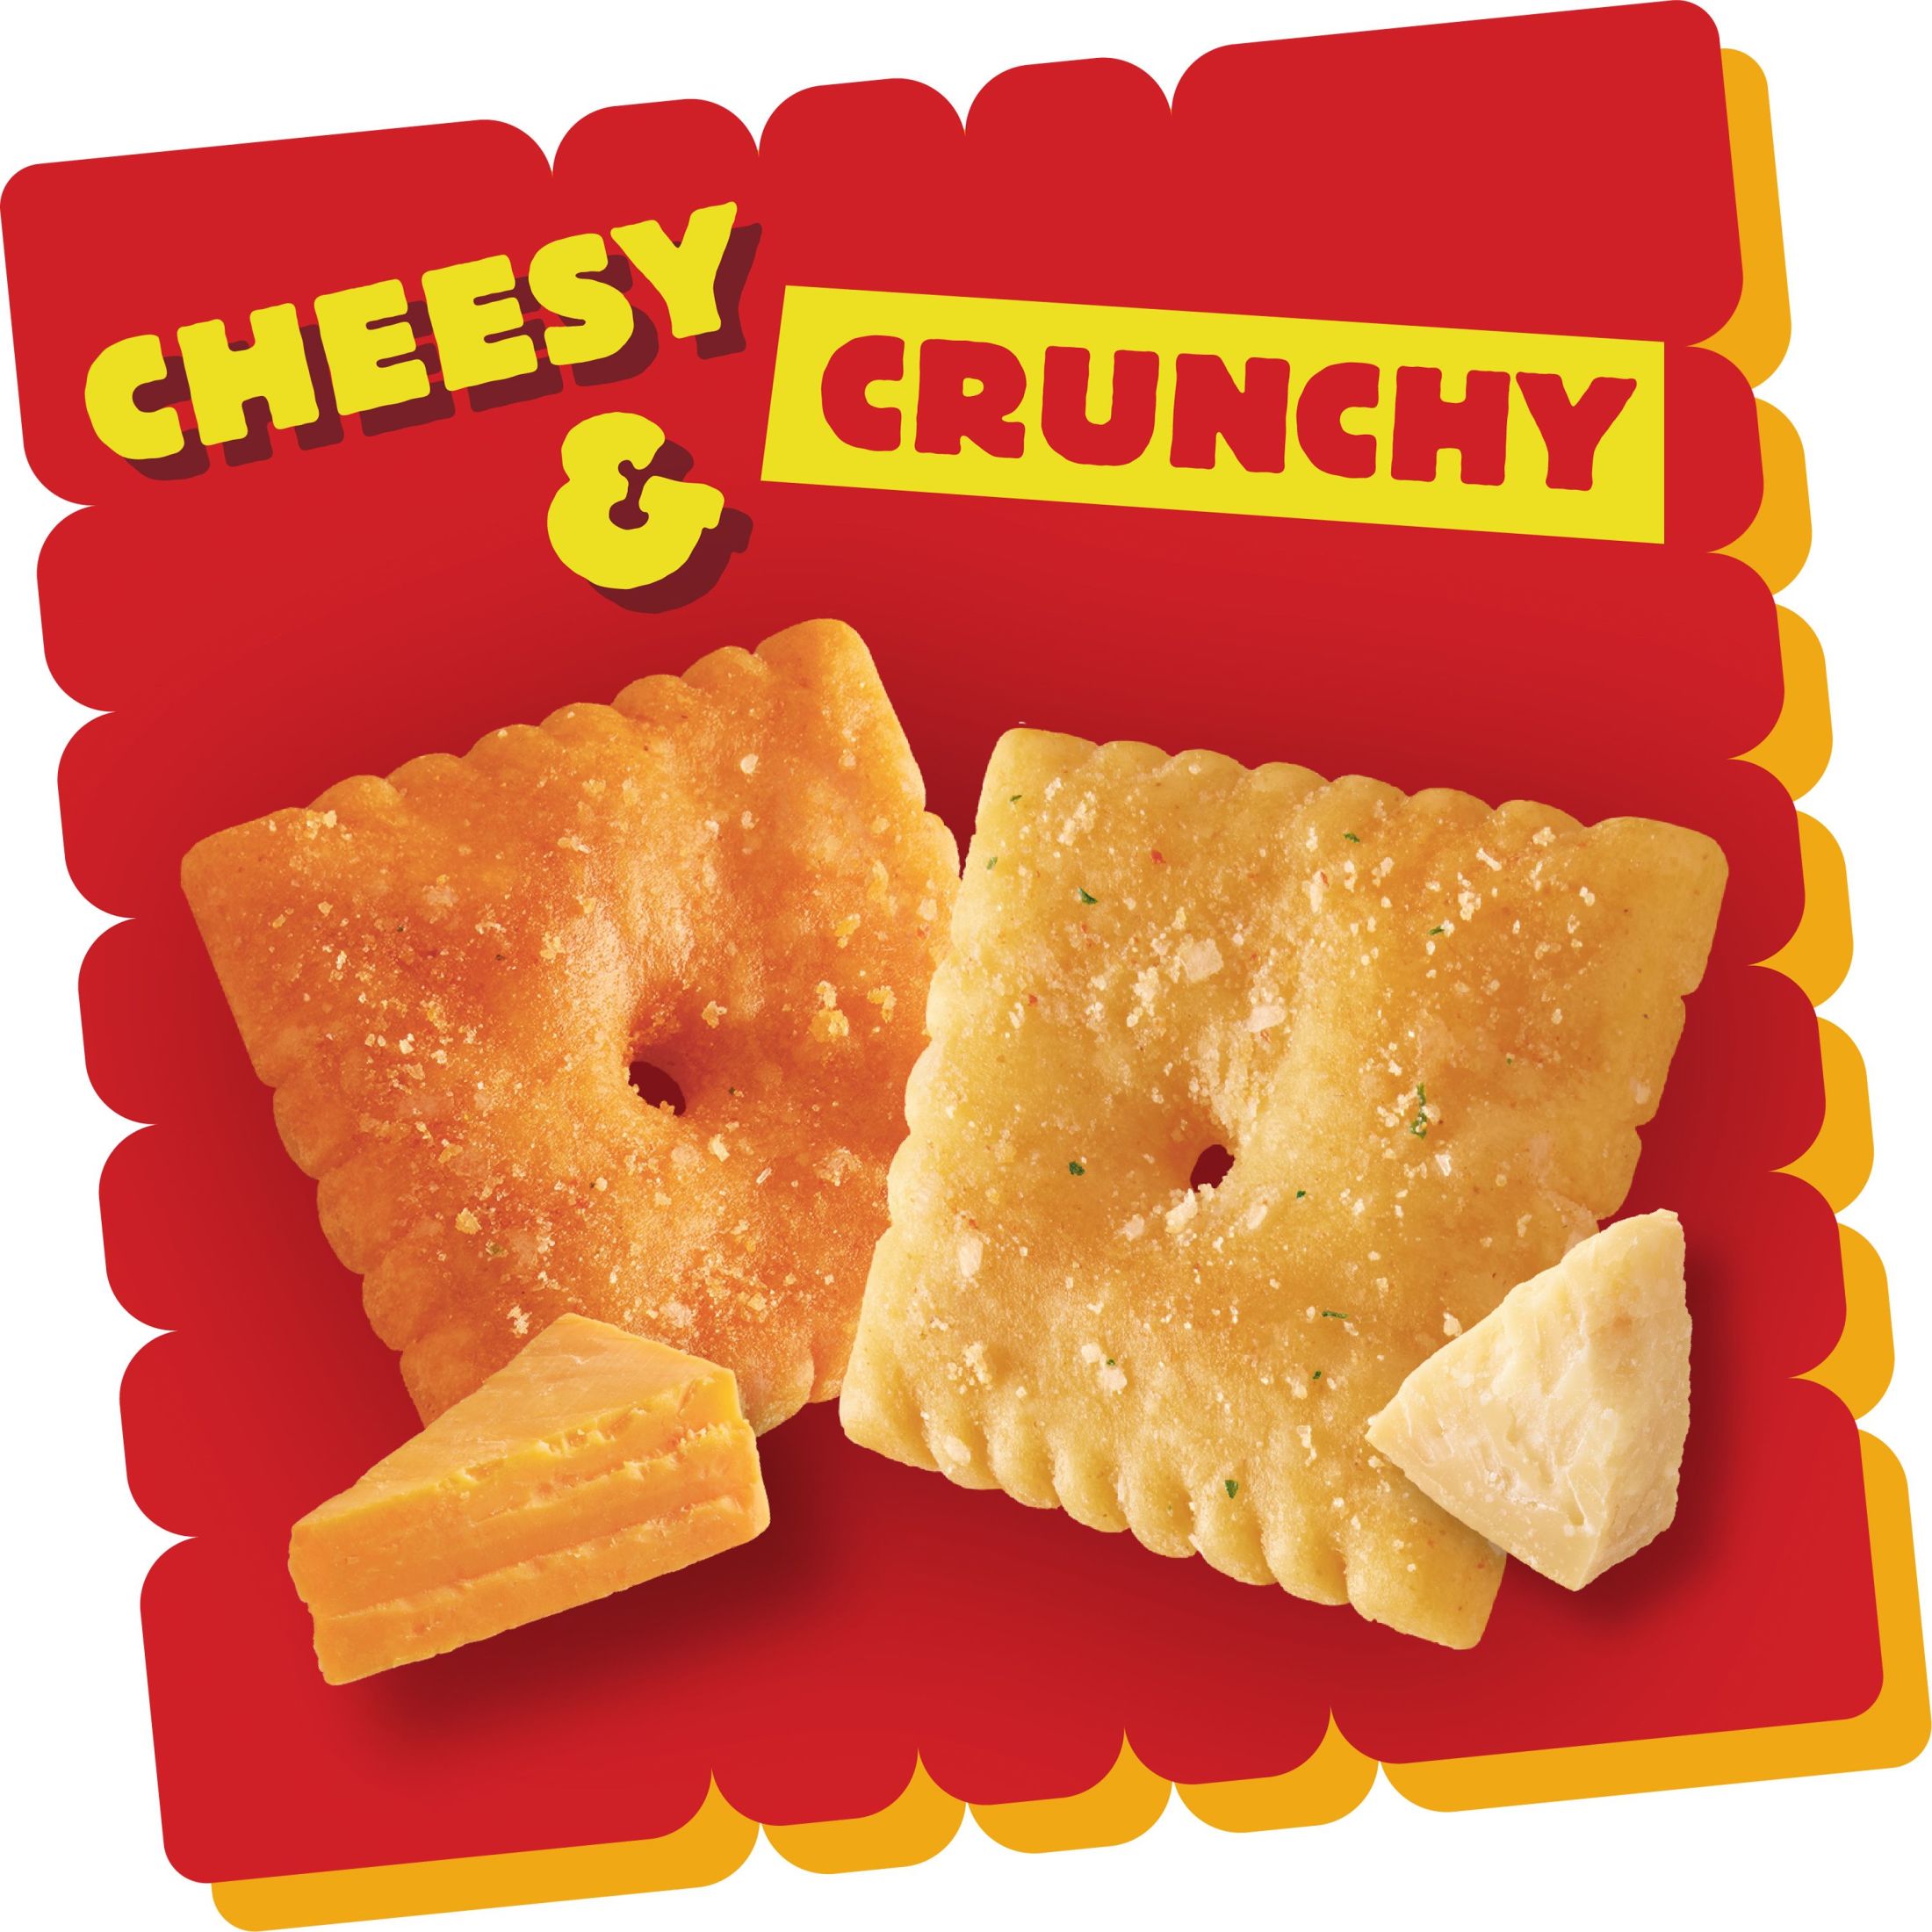 Cheez-It DUOZ Sharp Cheddar and Parmesan Cheese Crackers, Baked Snack Crackers, 12.4 oz - image 4 of 12